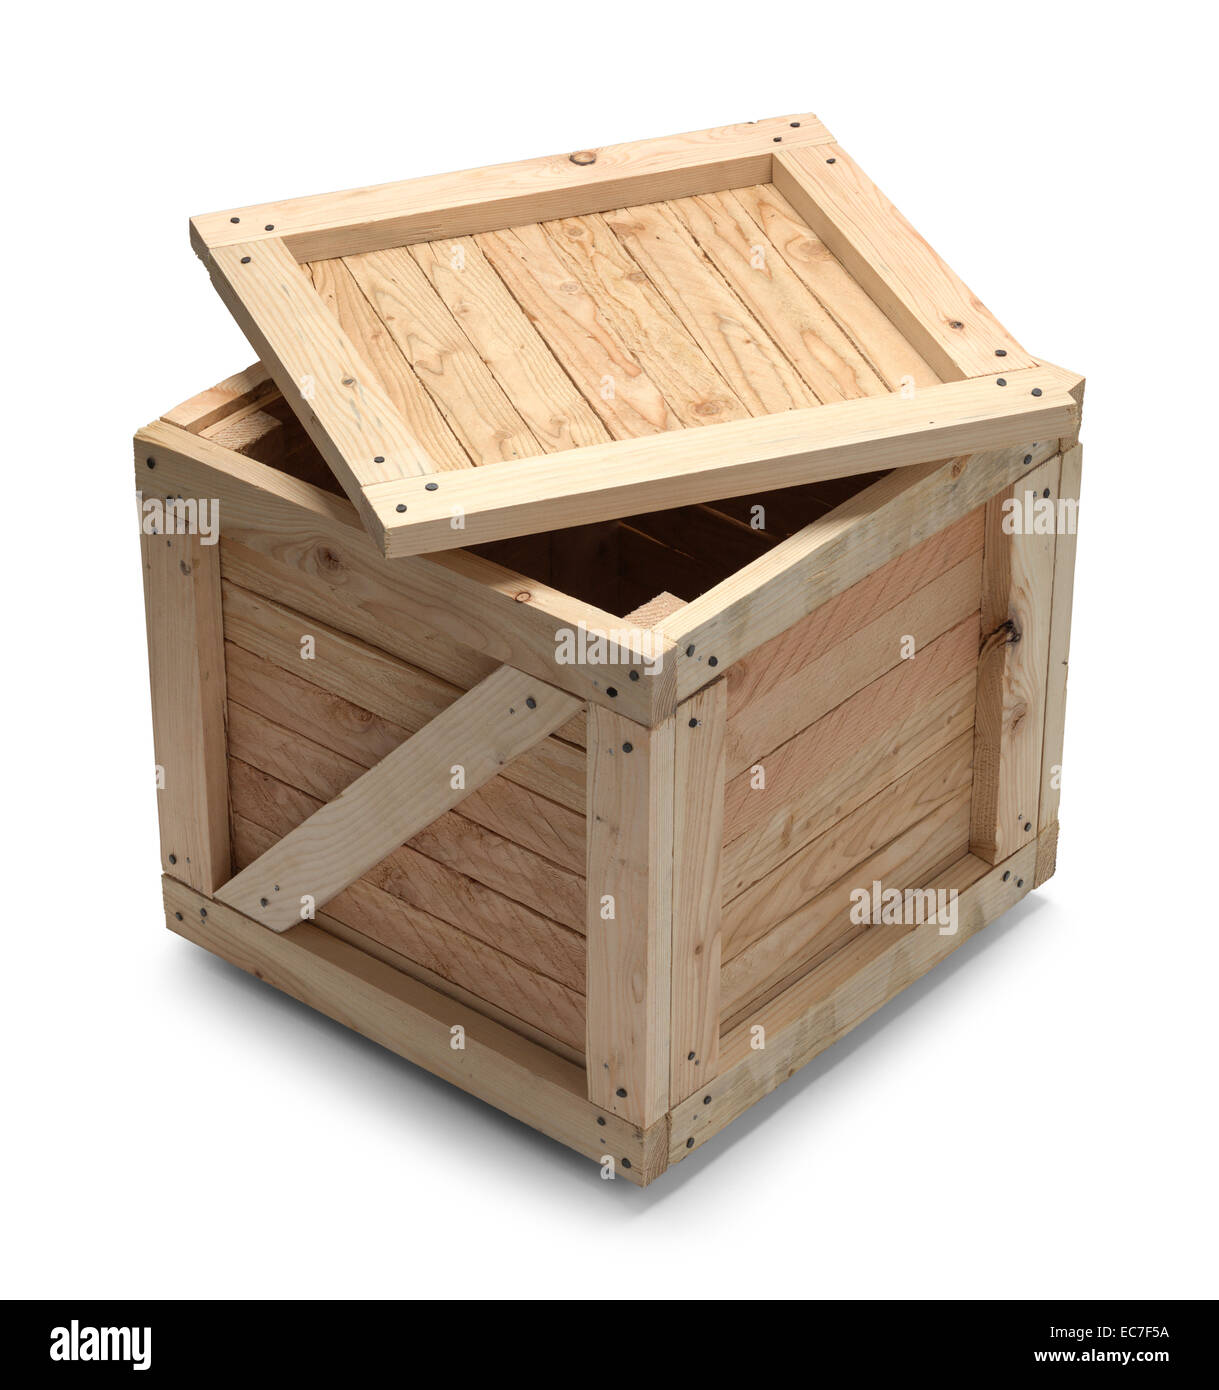 Wooden Crate With Lid Open Isolated on White Background. Stock Photo